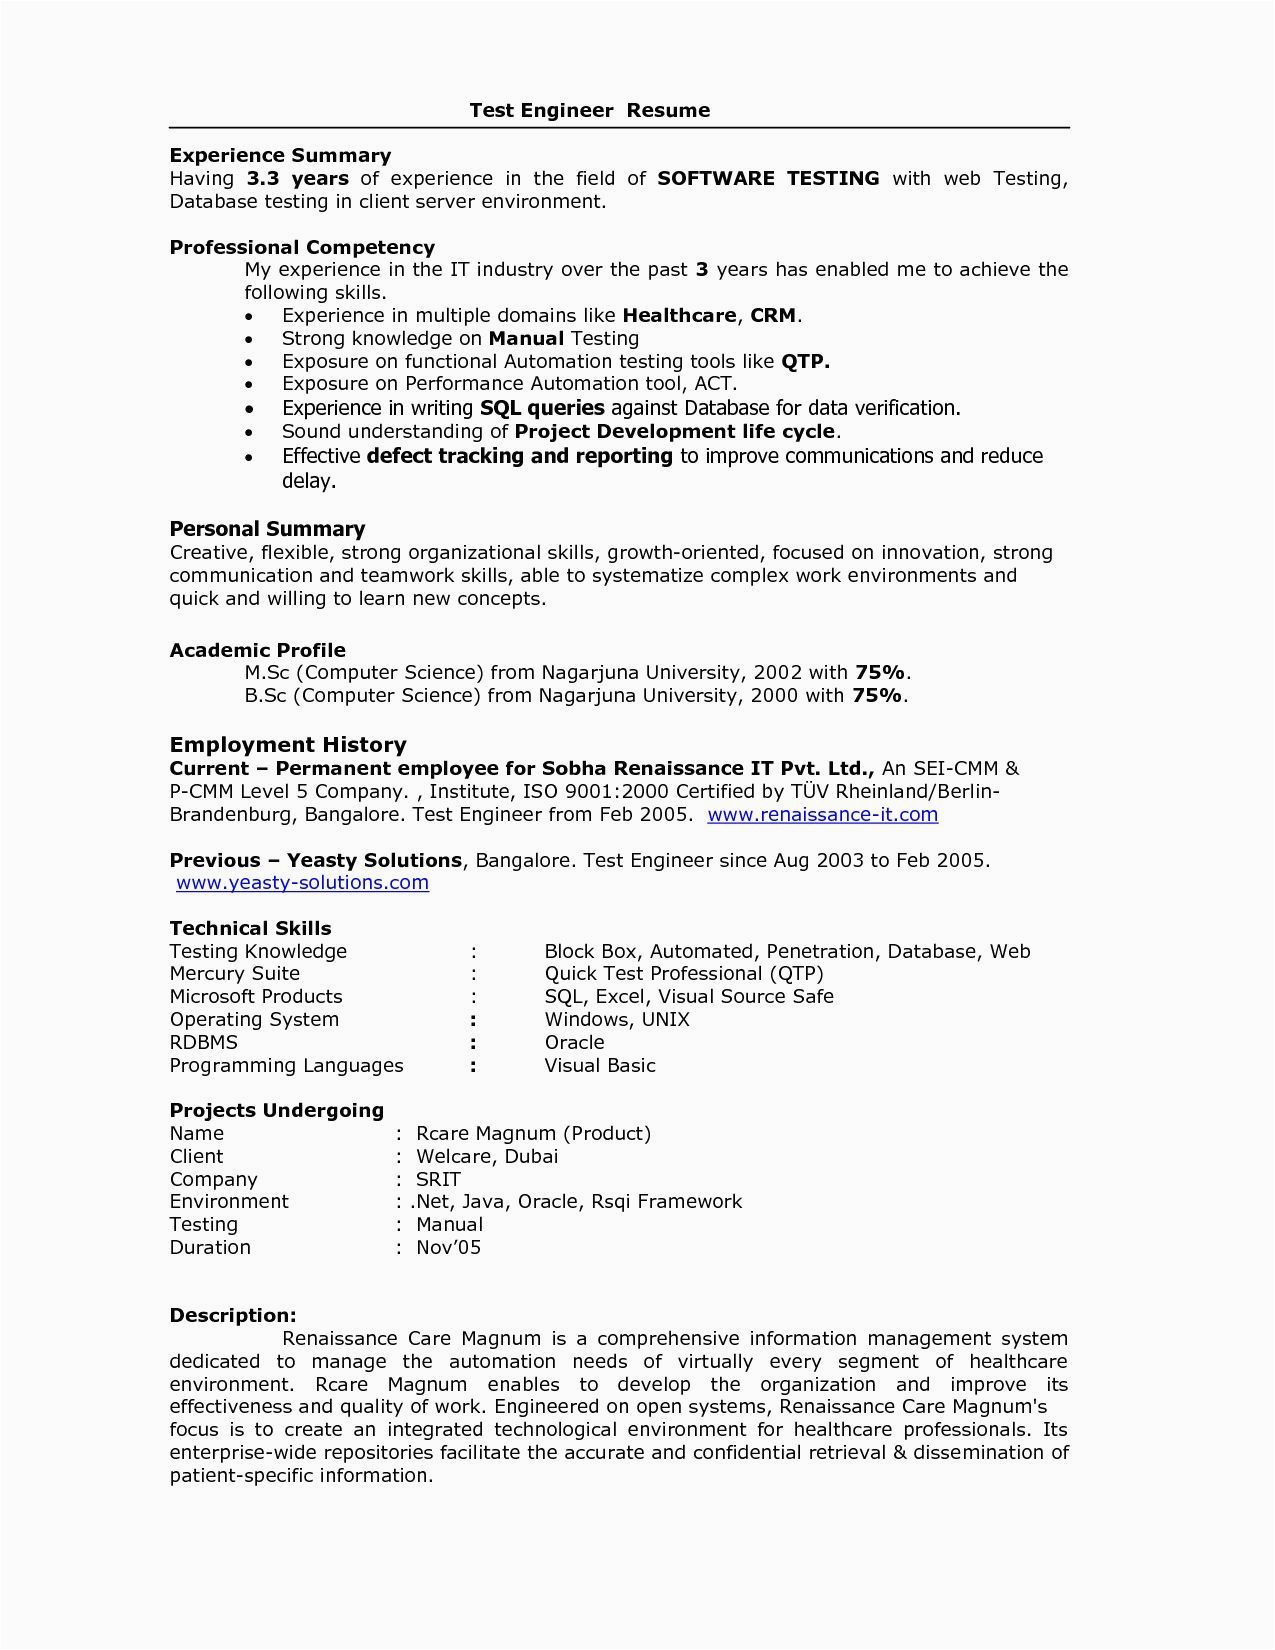 Sample Resume for Manual Testing with 1 Year Experience 5 Years Testing Experience